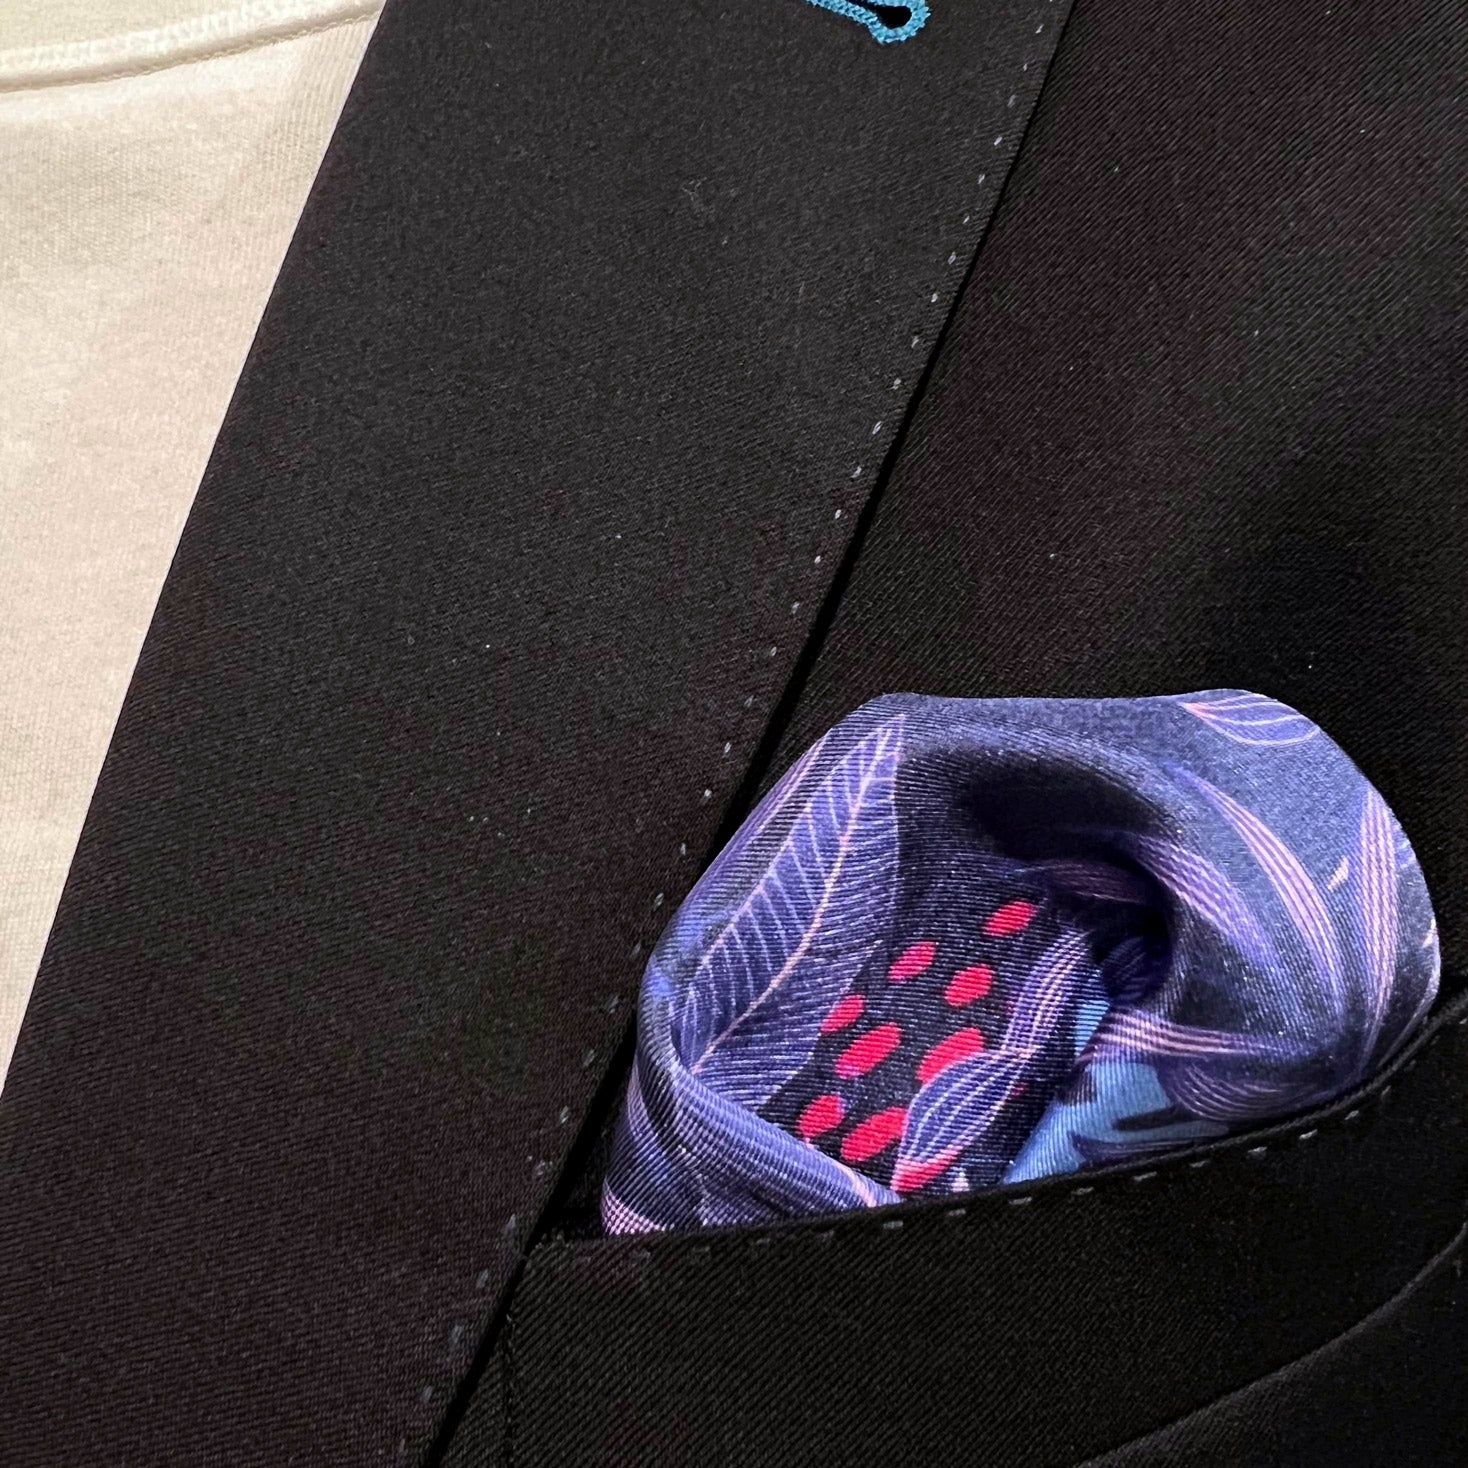 Silk square handkerchief with floral pattern on a purple-blue ground and placed in a jacket breast pocket.